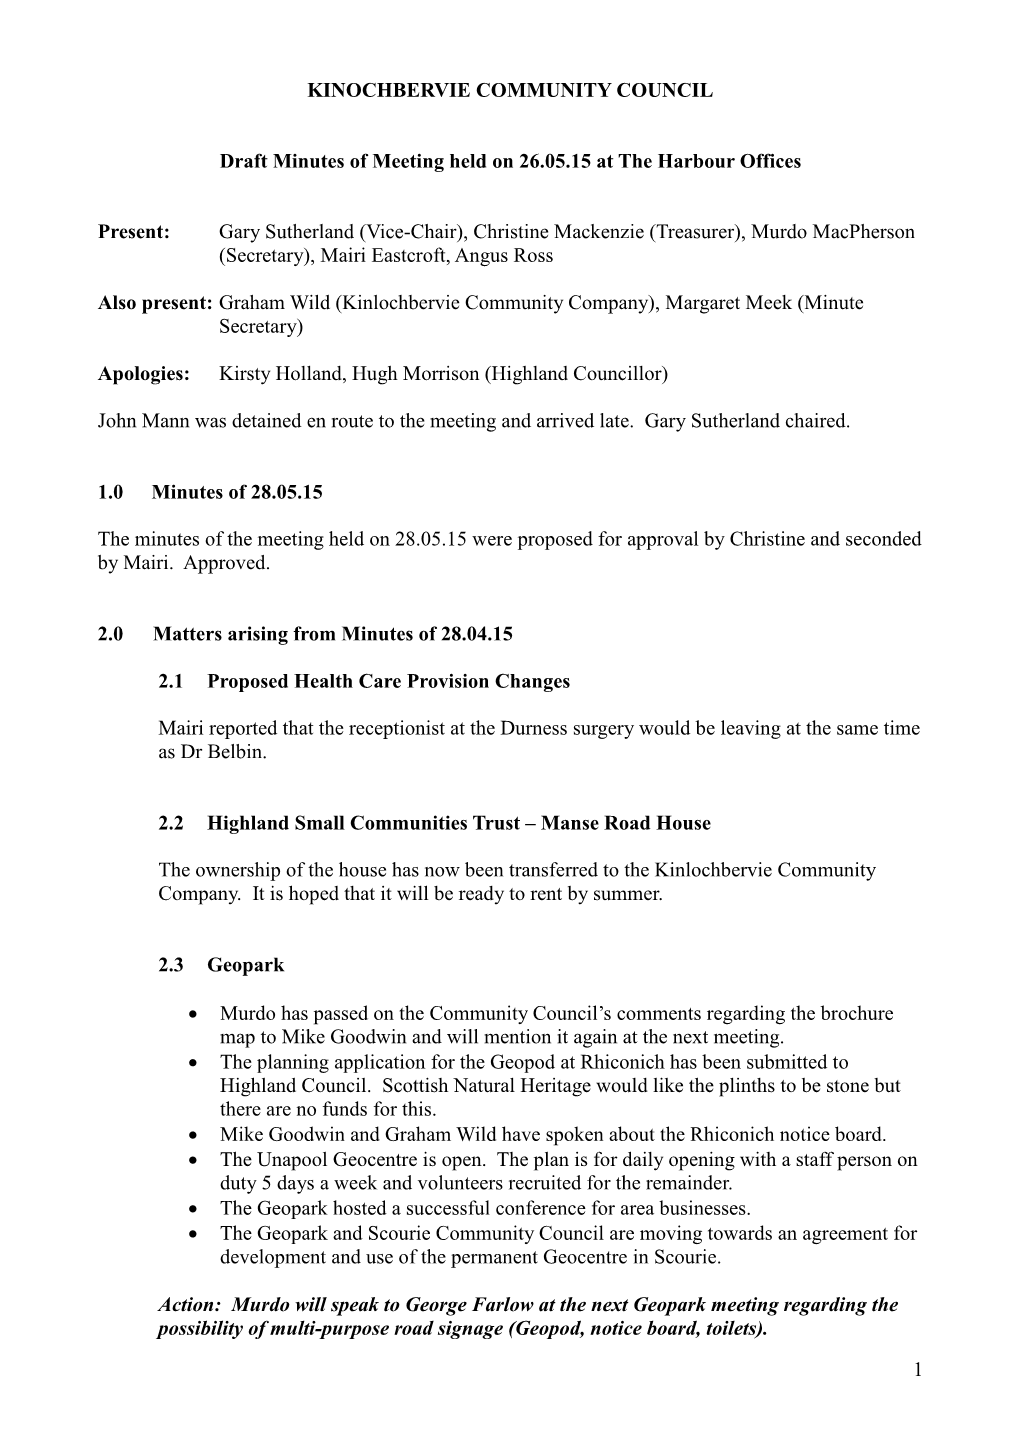 1 KINOCHBERVIE COMMUNITY COUNCIL Draft Minutes of Meeting Held on 26.05.15 at the Harbour Offices Present: Gary Sutherland (Vice